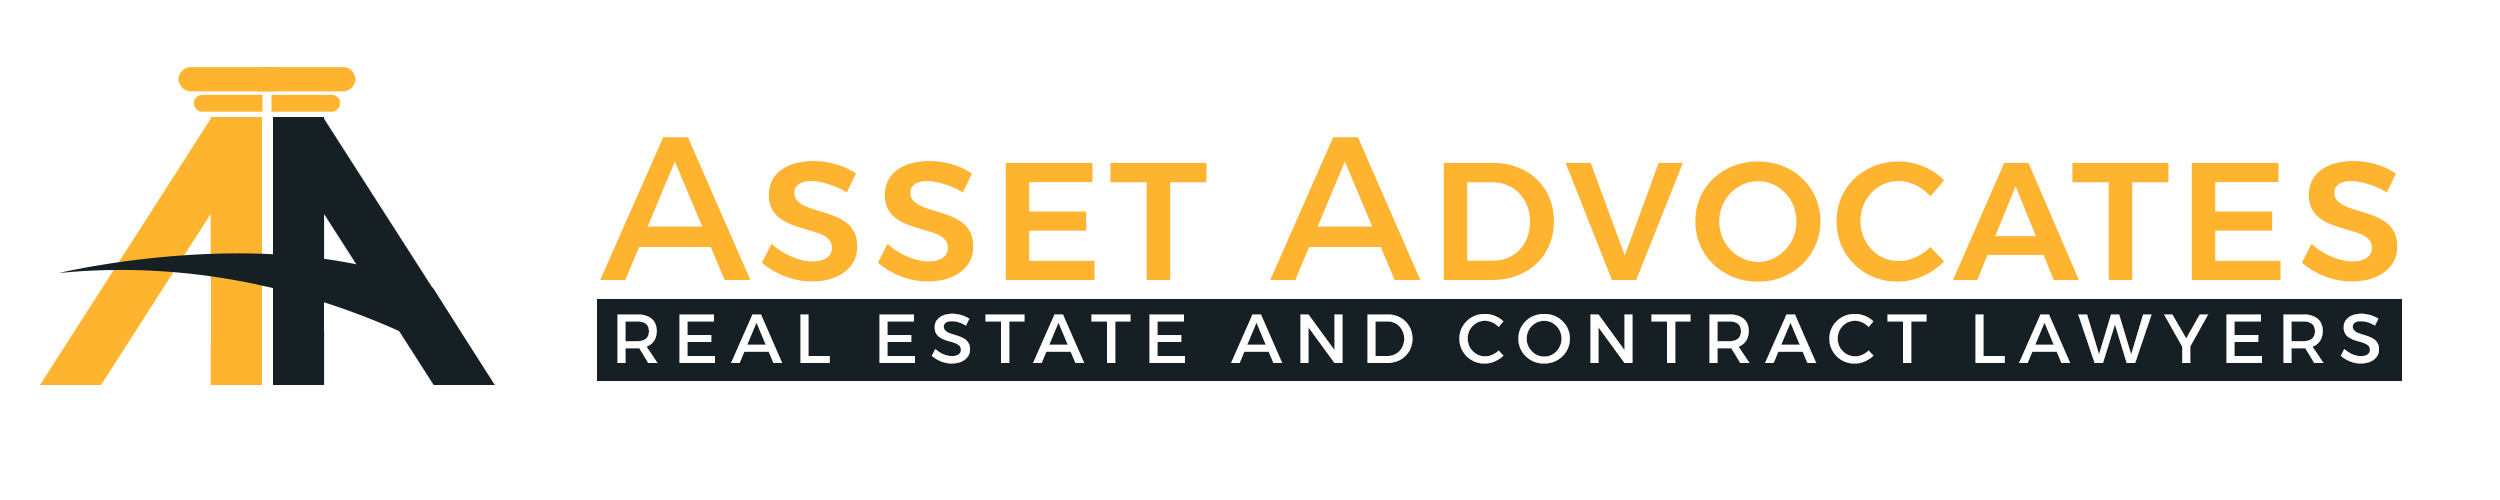 Asset-Advocates-Real-Estate-and-Contract-Lawyers-Logo-1.jpg